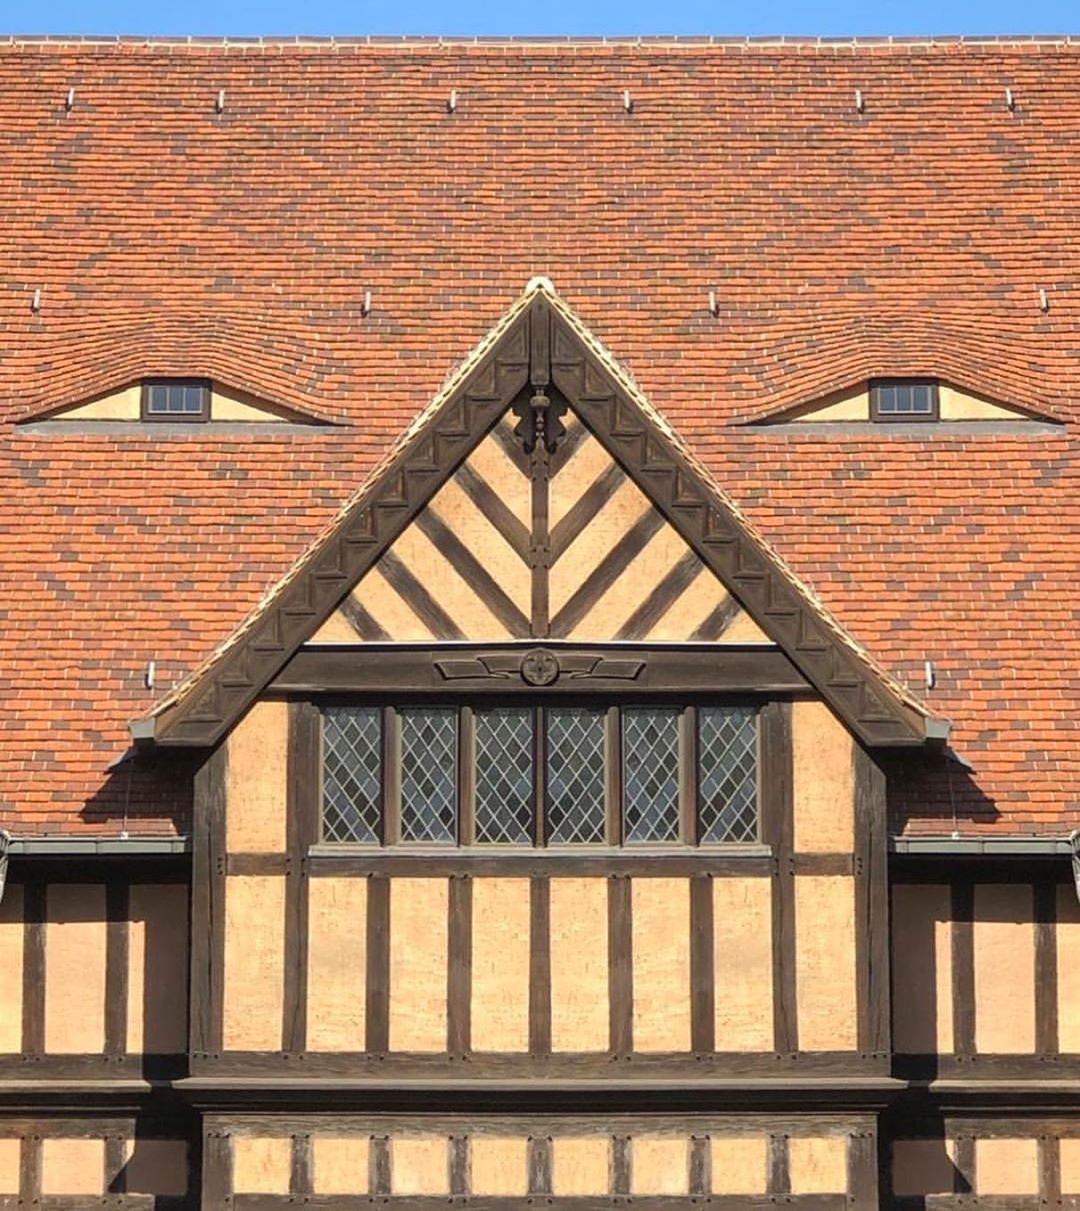 Accidentally Wes Anderson - Cecilienhof Palace